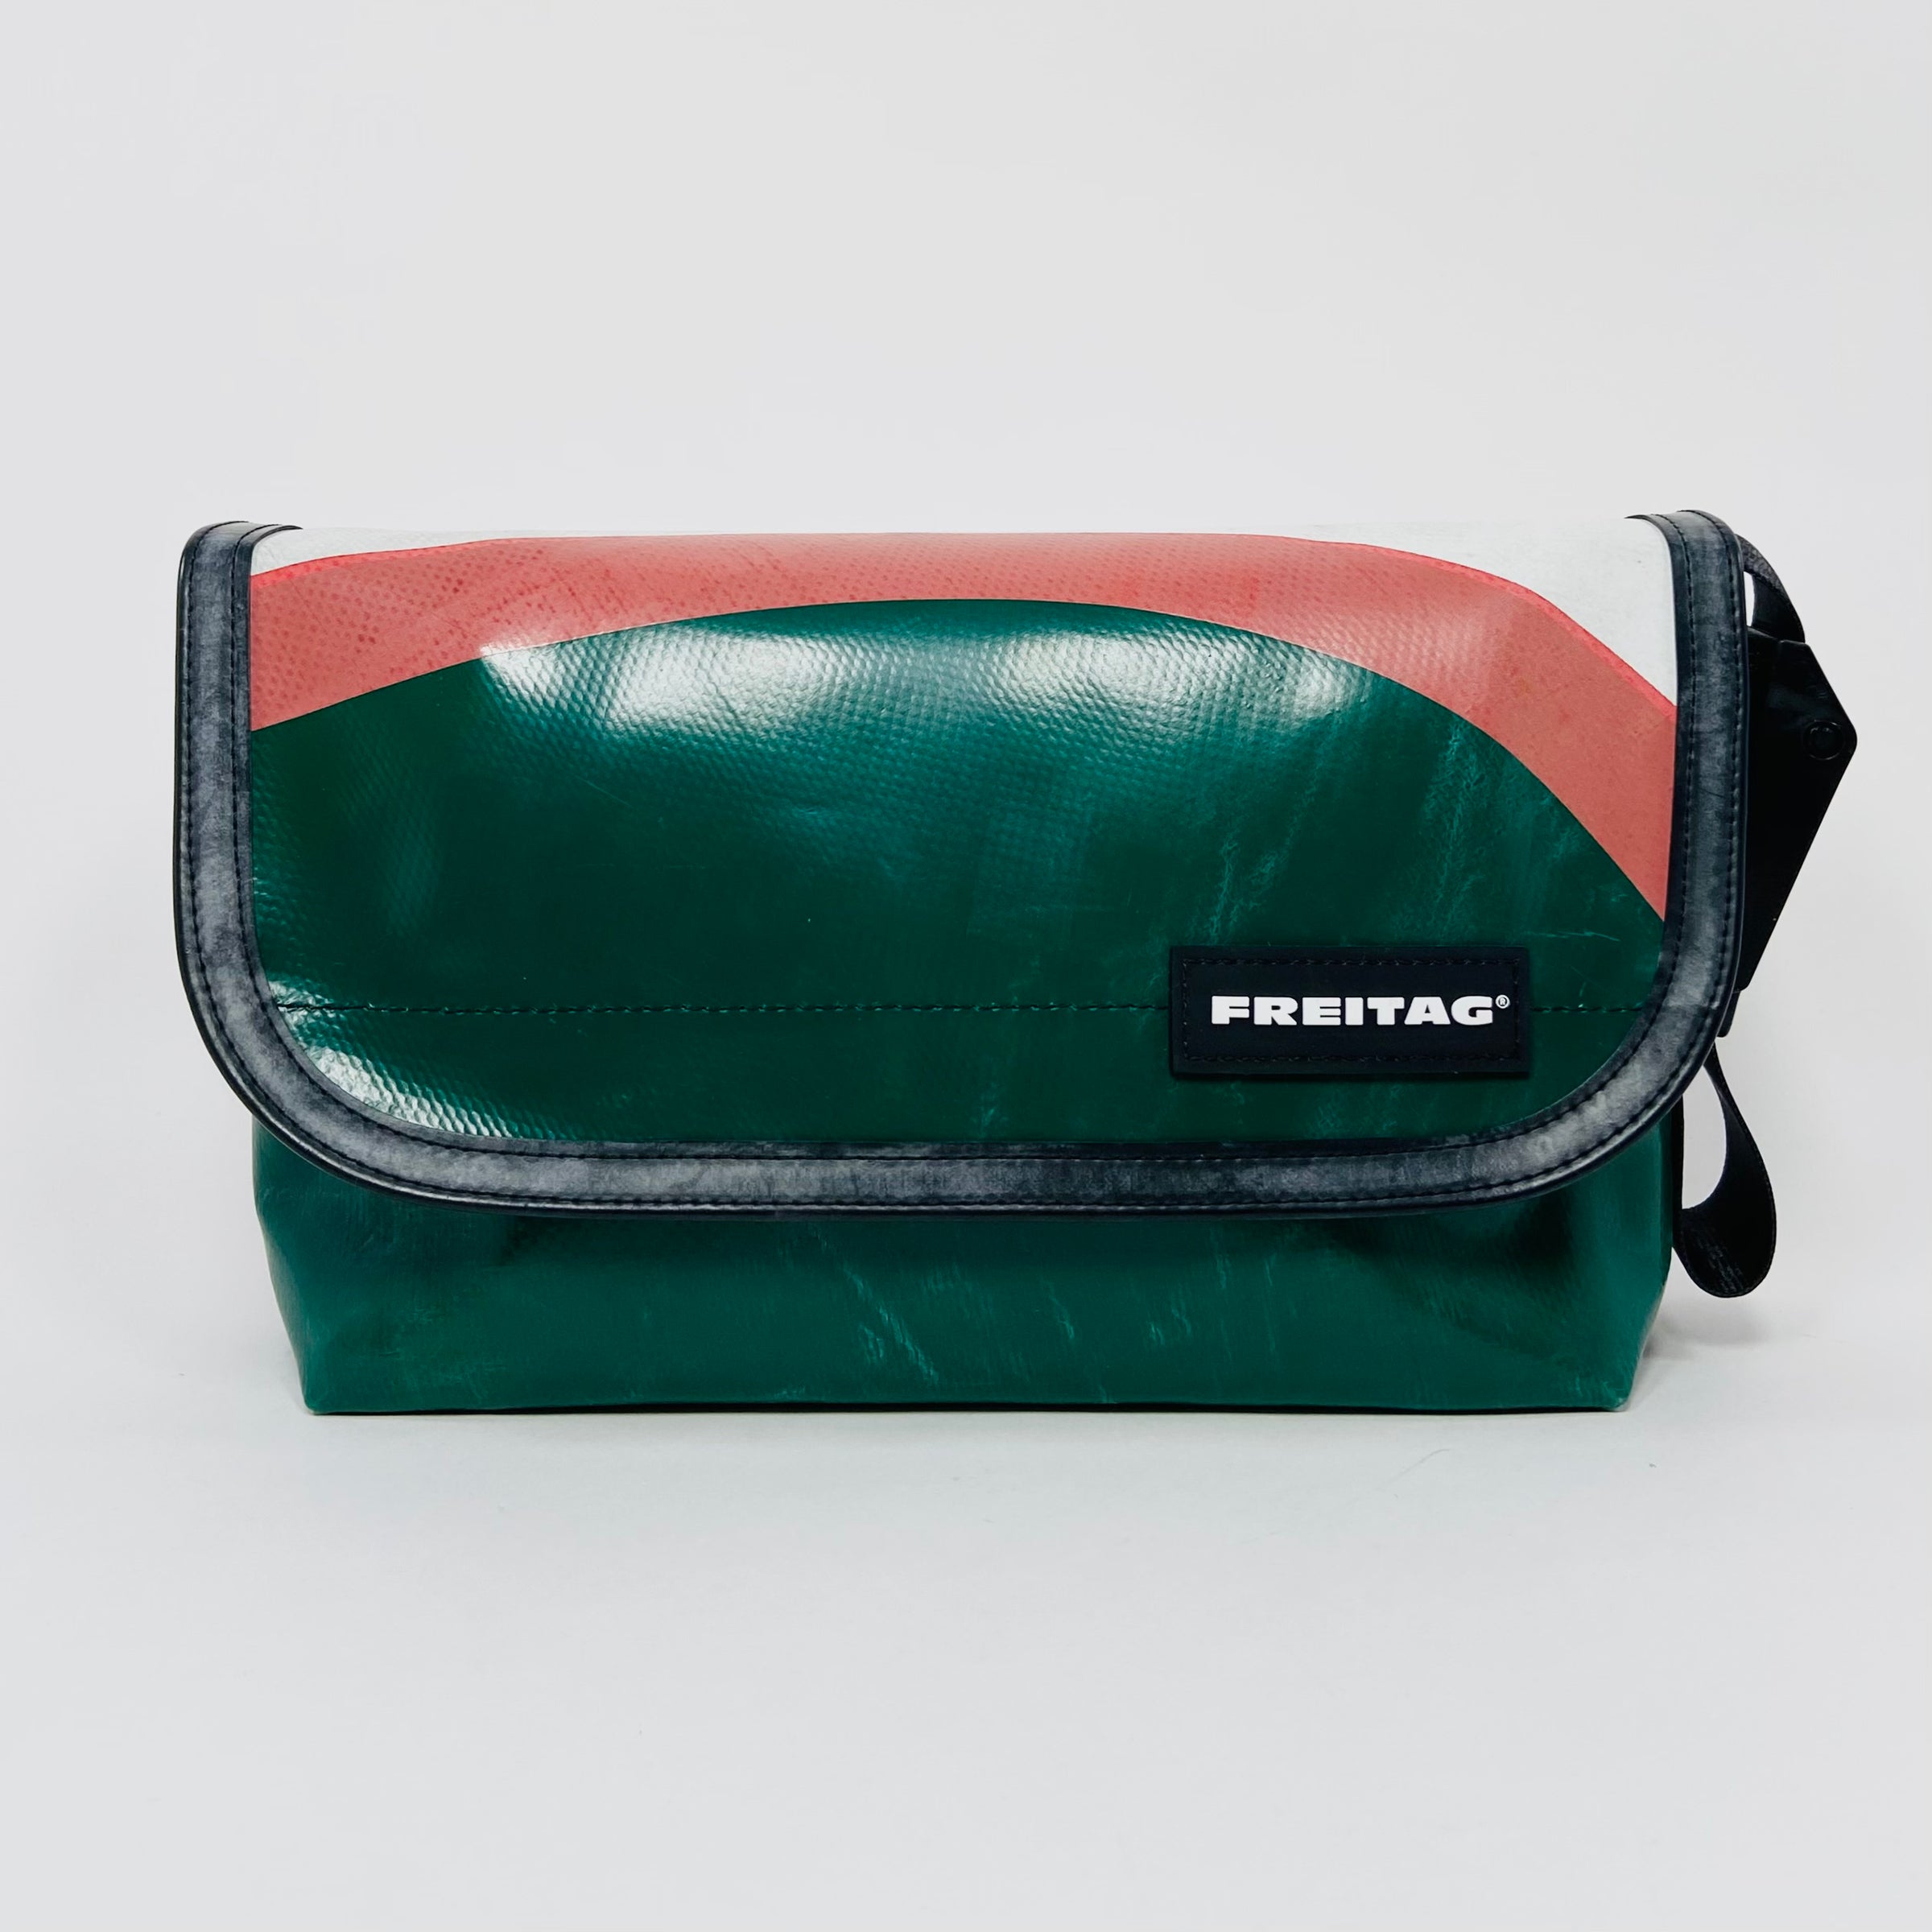 FREITAG F41 - Hawaii Five-0 - Dark Green, White and Red | UNITOM